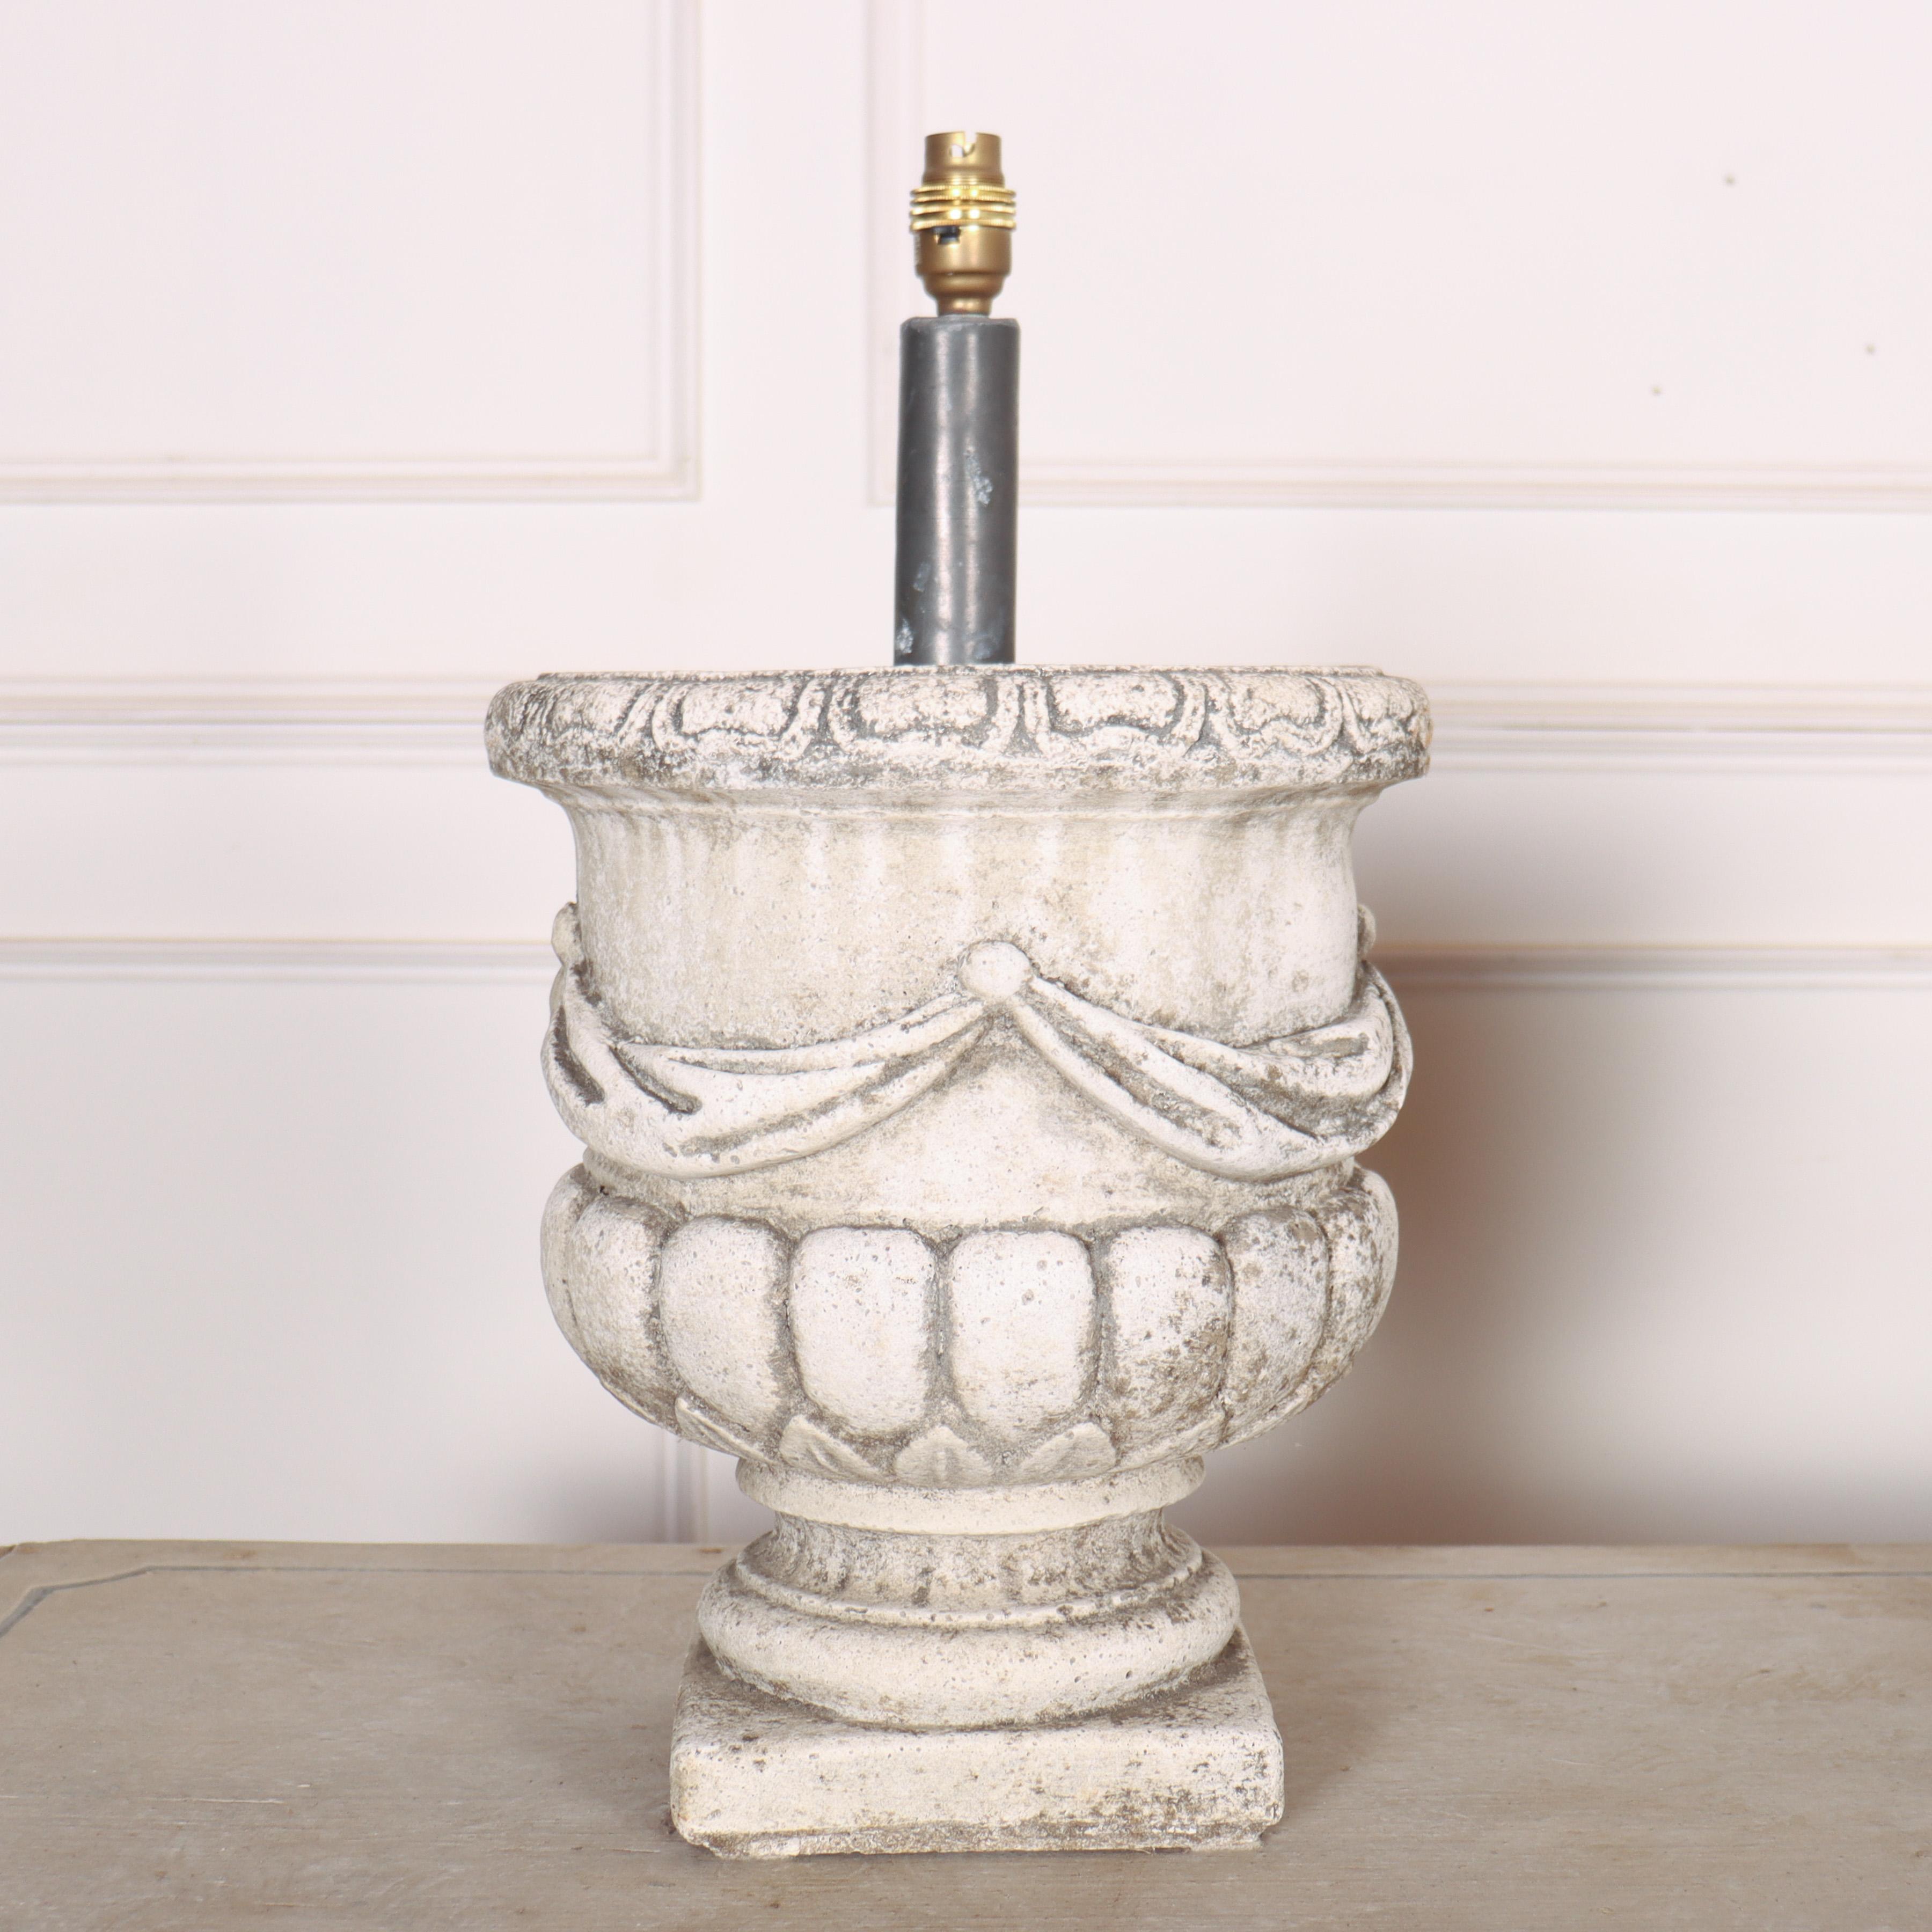 Pair of 1920s reconstituted stone urn table lamps.

Reference: 8075

Dimensions
20 inches (51 cms) High
12 inches (30 cms) Diameter